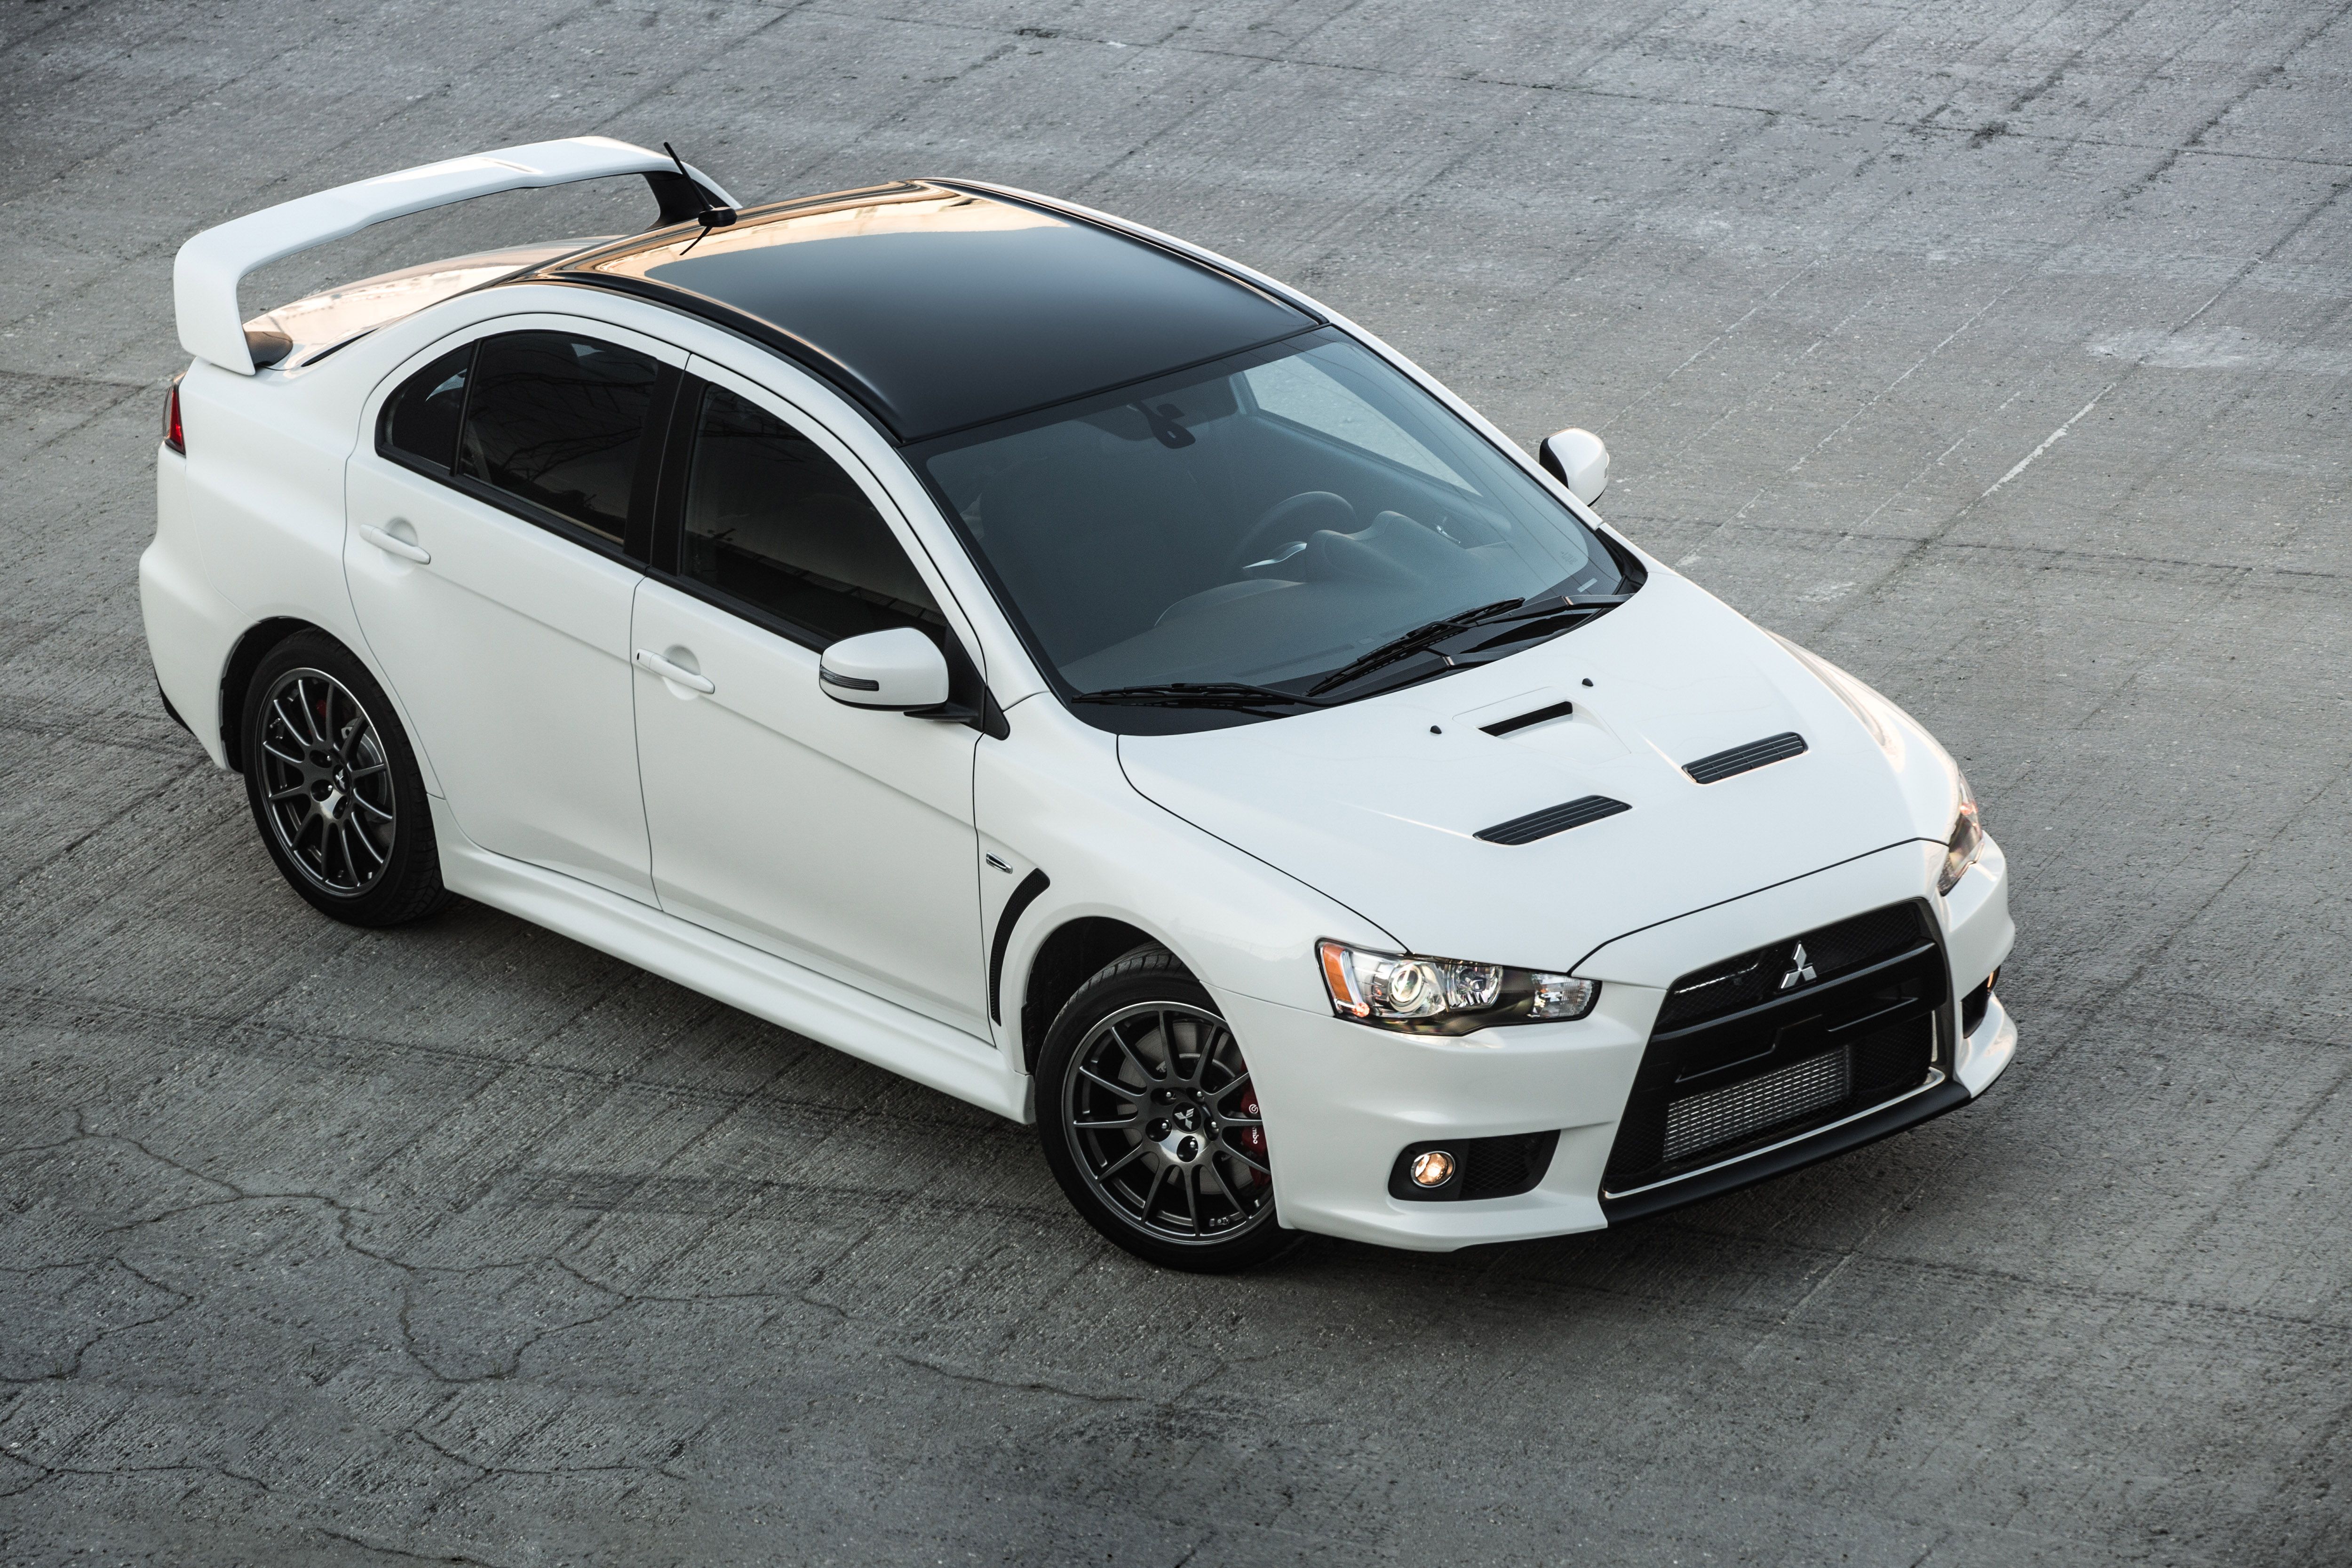 The Mitsubishi Lancer Evo Isn't Coming Back, Even Though We Want It